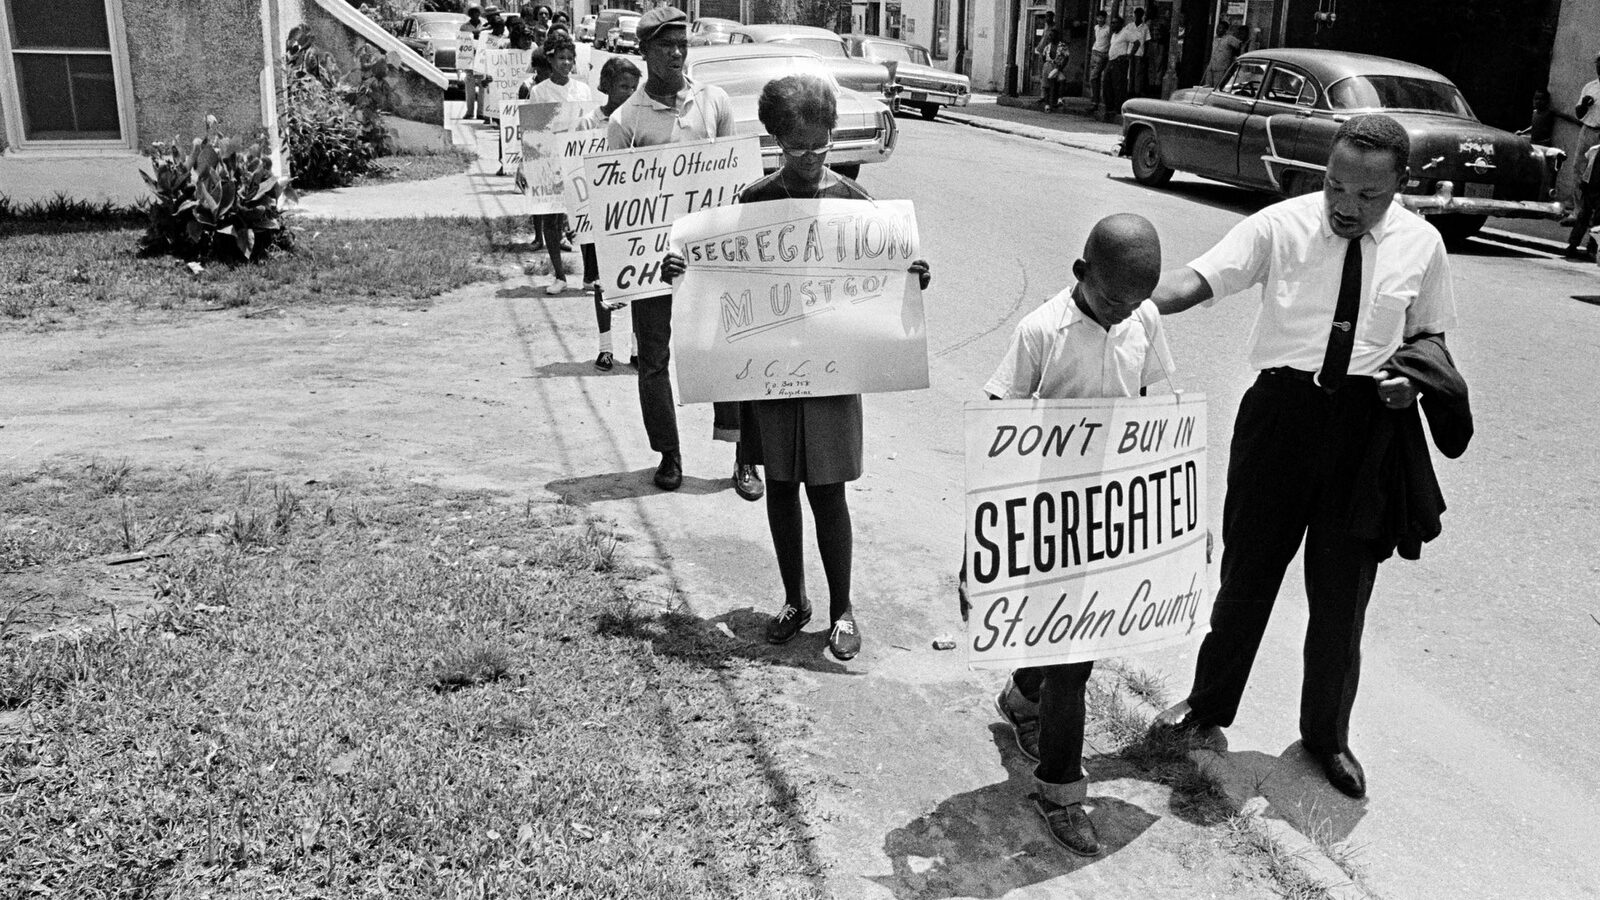 Dr. Martin Luther King, Jr. gives a young picket a pat on the back as a group of youngsters started to picket St. Augustine, Fla., June 10, 1964. (AP Photo)